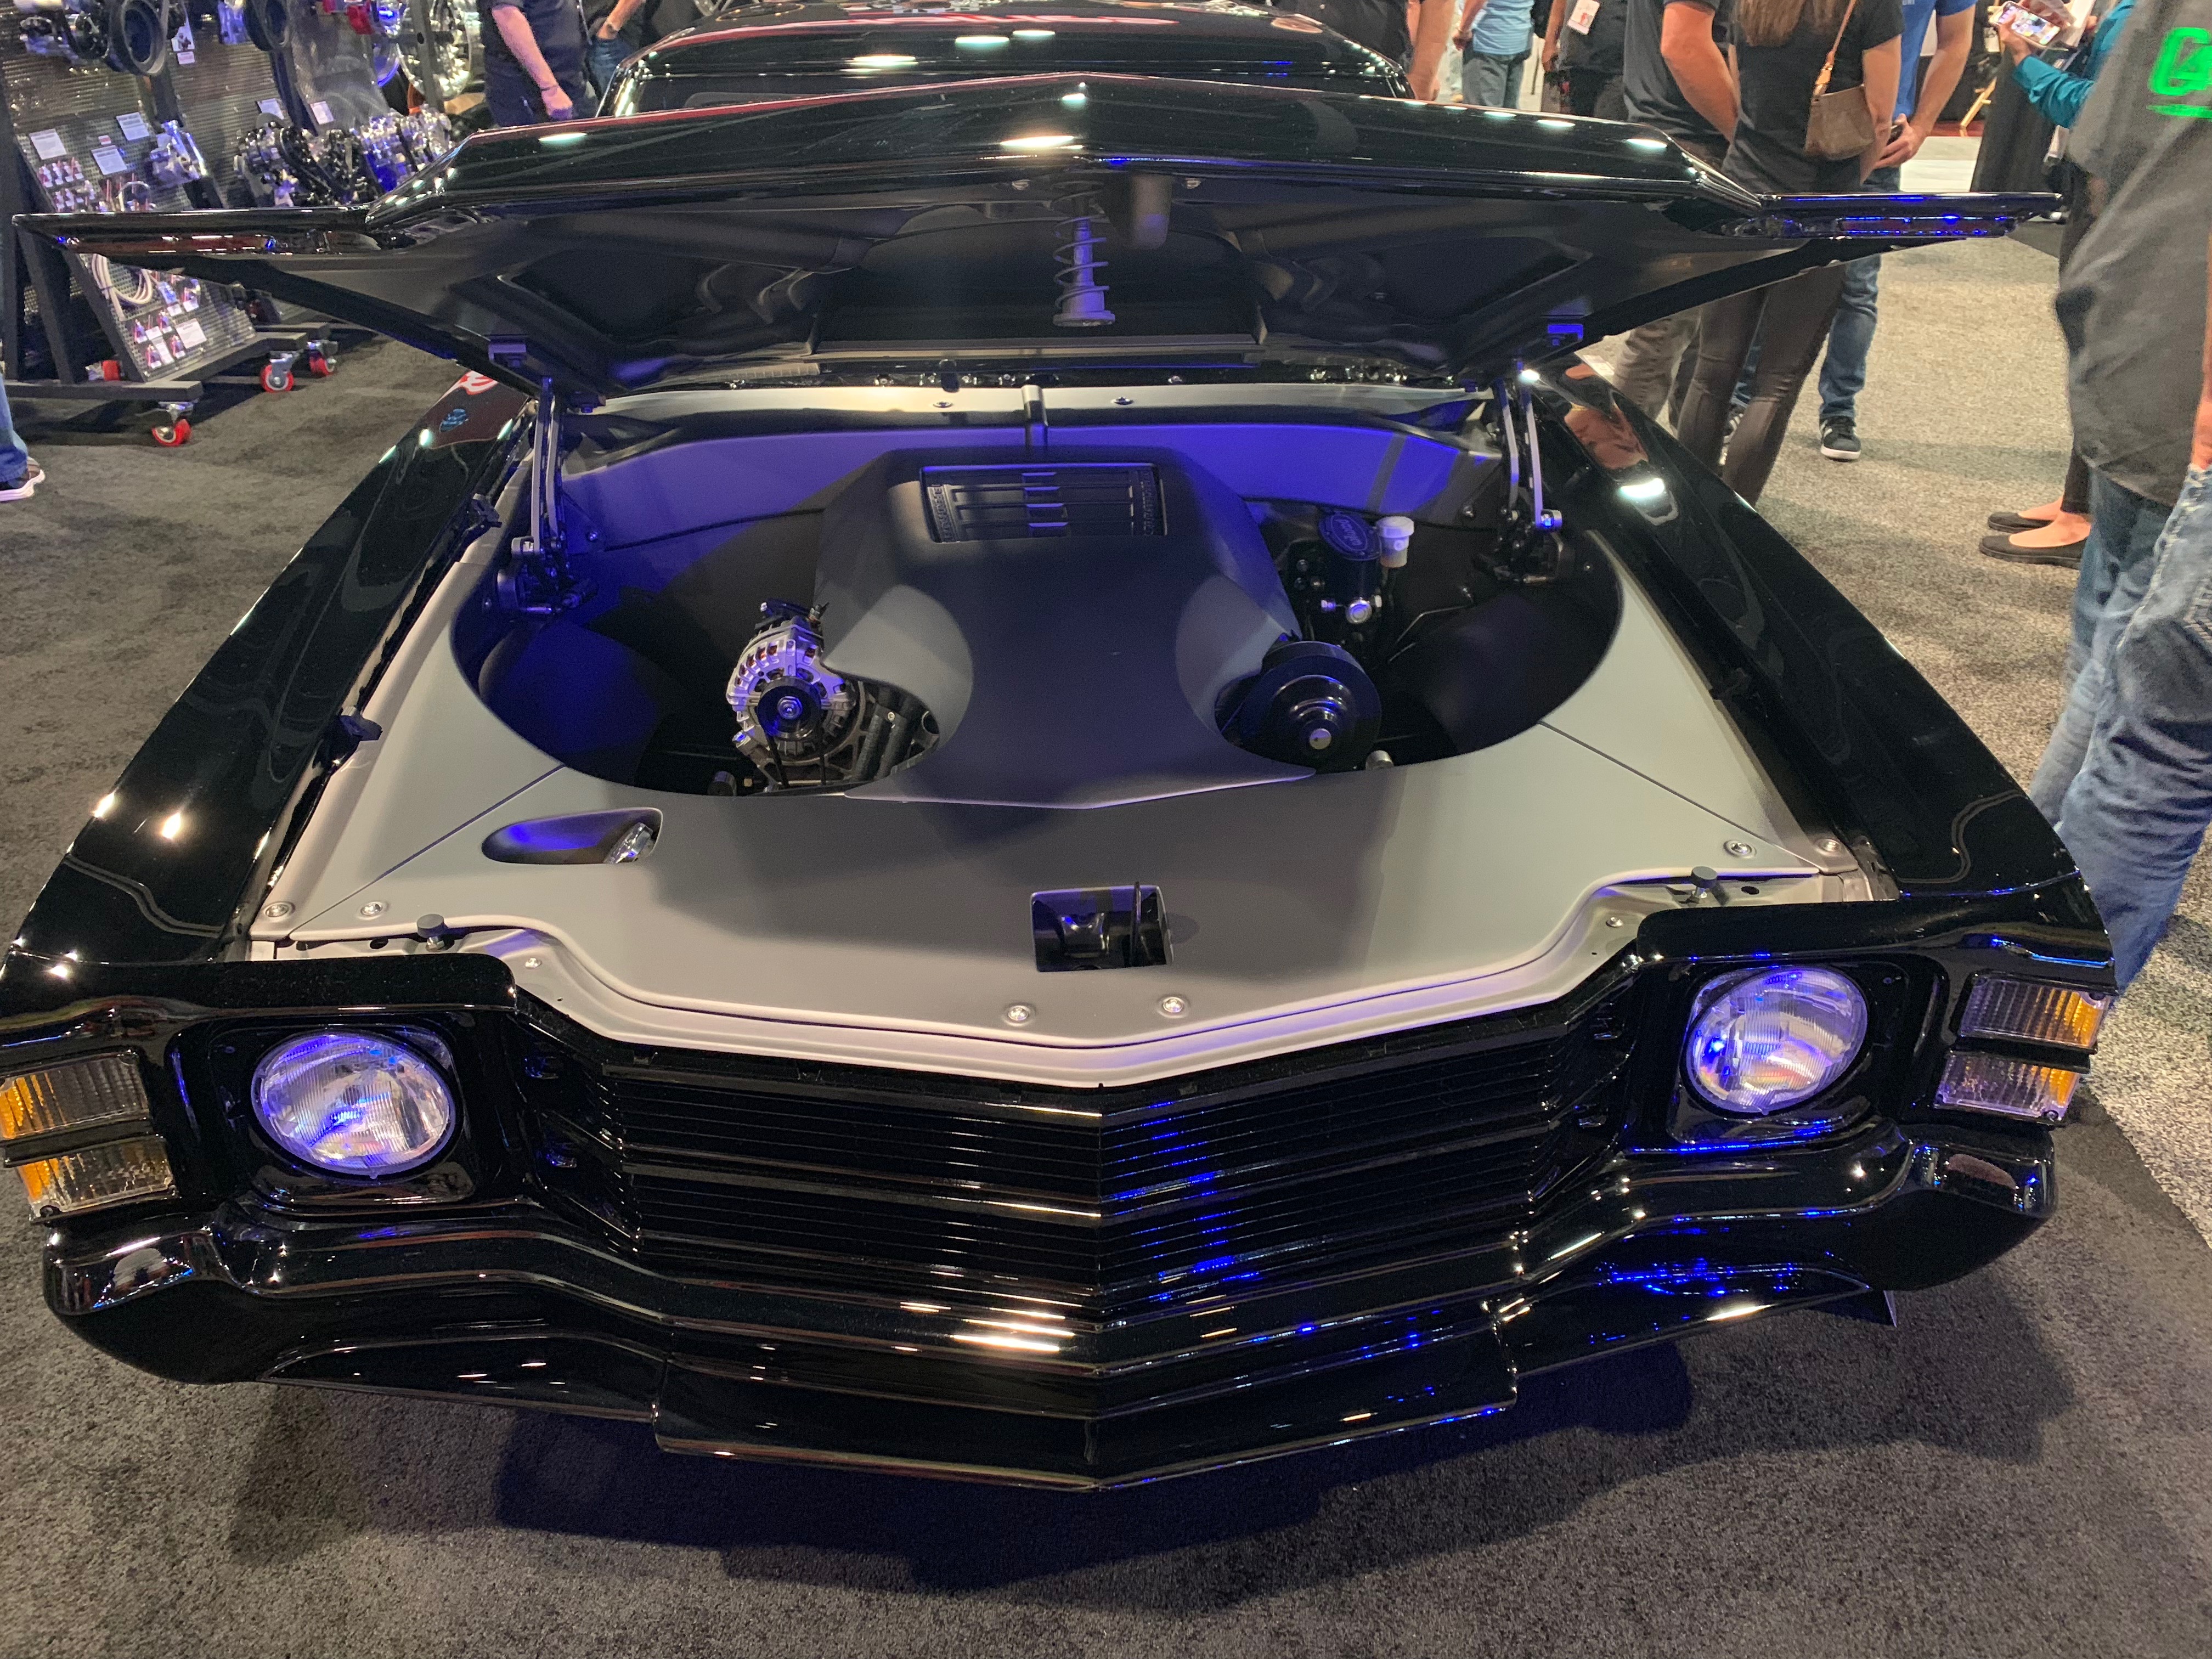 With the black paint and subtle purple neon, this Noah Alexander-built 1971 Chevrolet Chevelle was a perfect fit on the SEMA Show floor on Halloween. | Carter Nacke photo